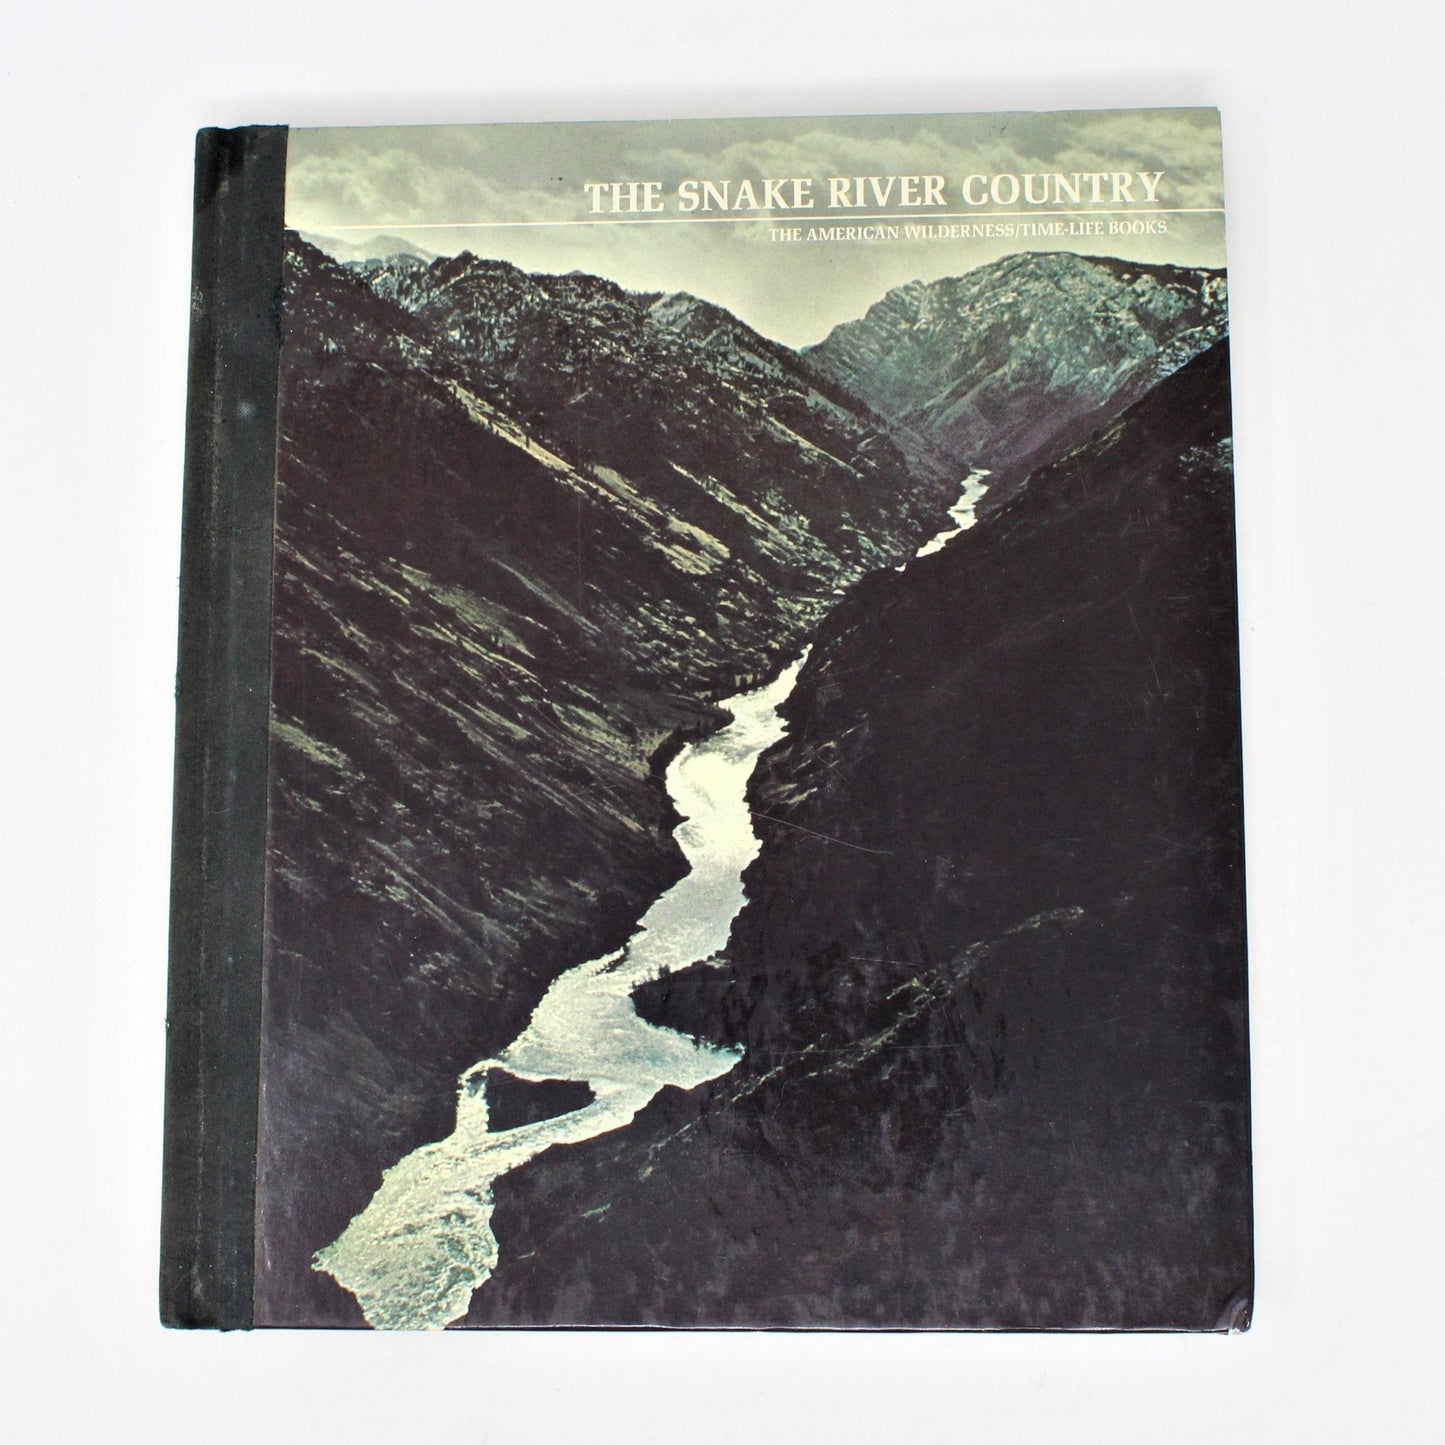 Book, Time-Life, Snake River Country, The American Wilderness, Hardcover, Vintage 1974